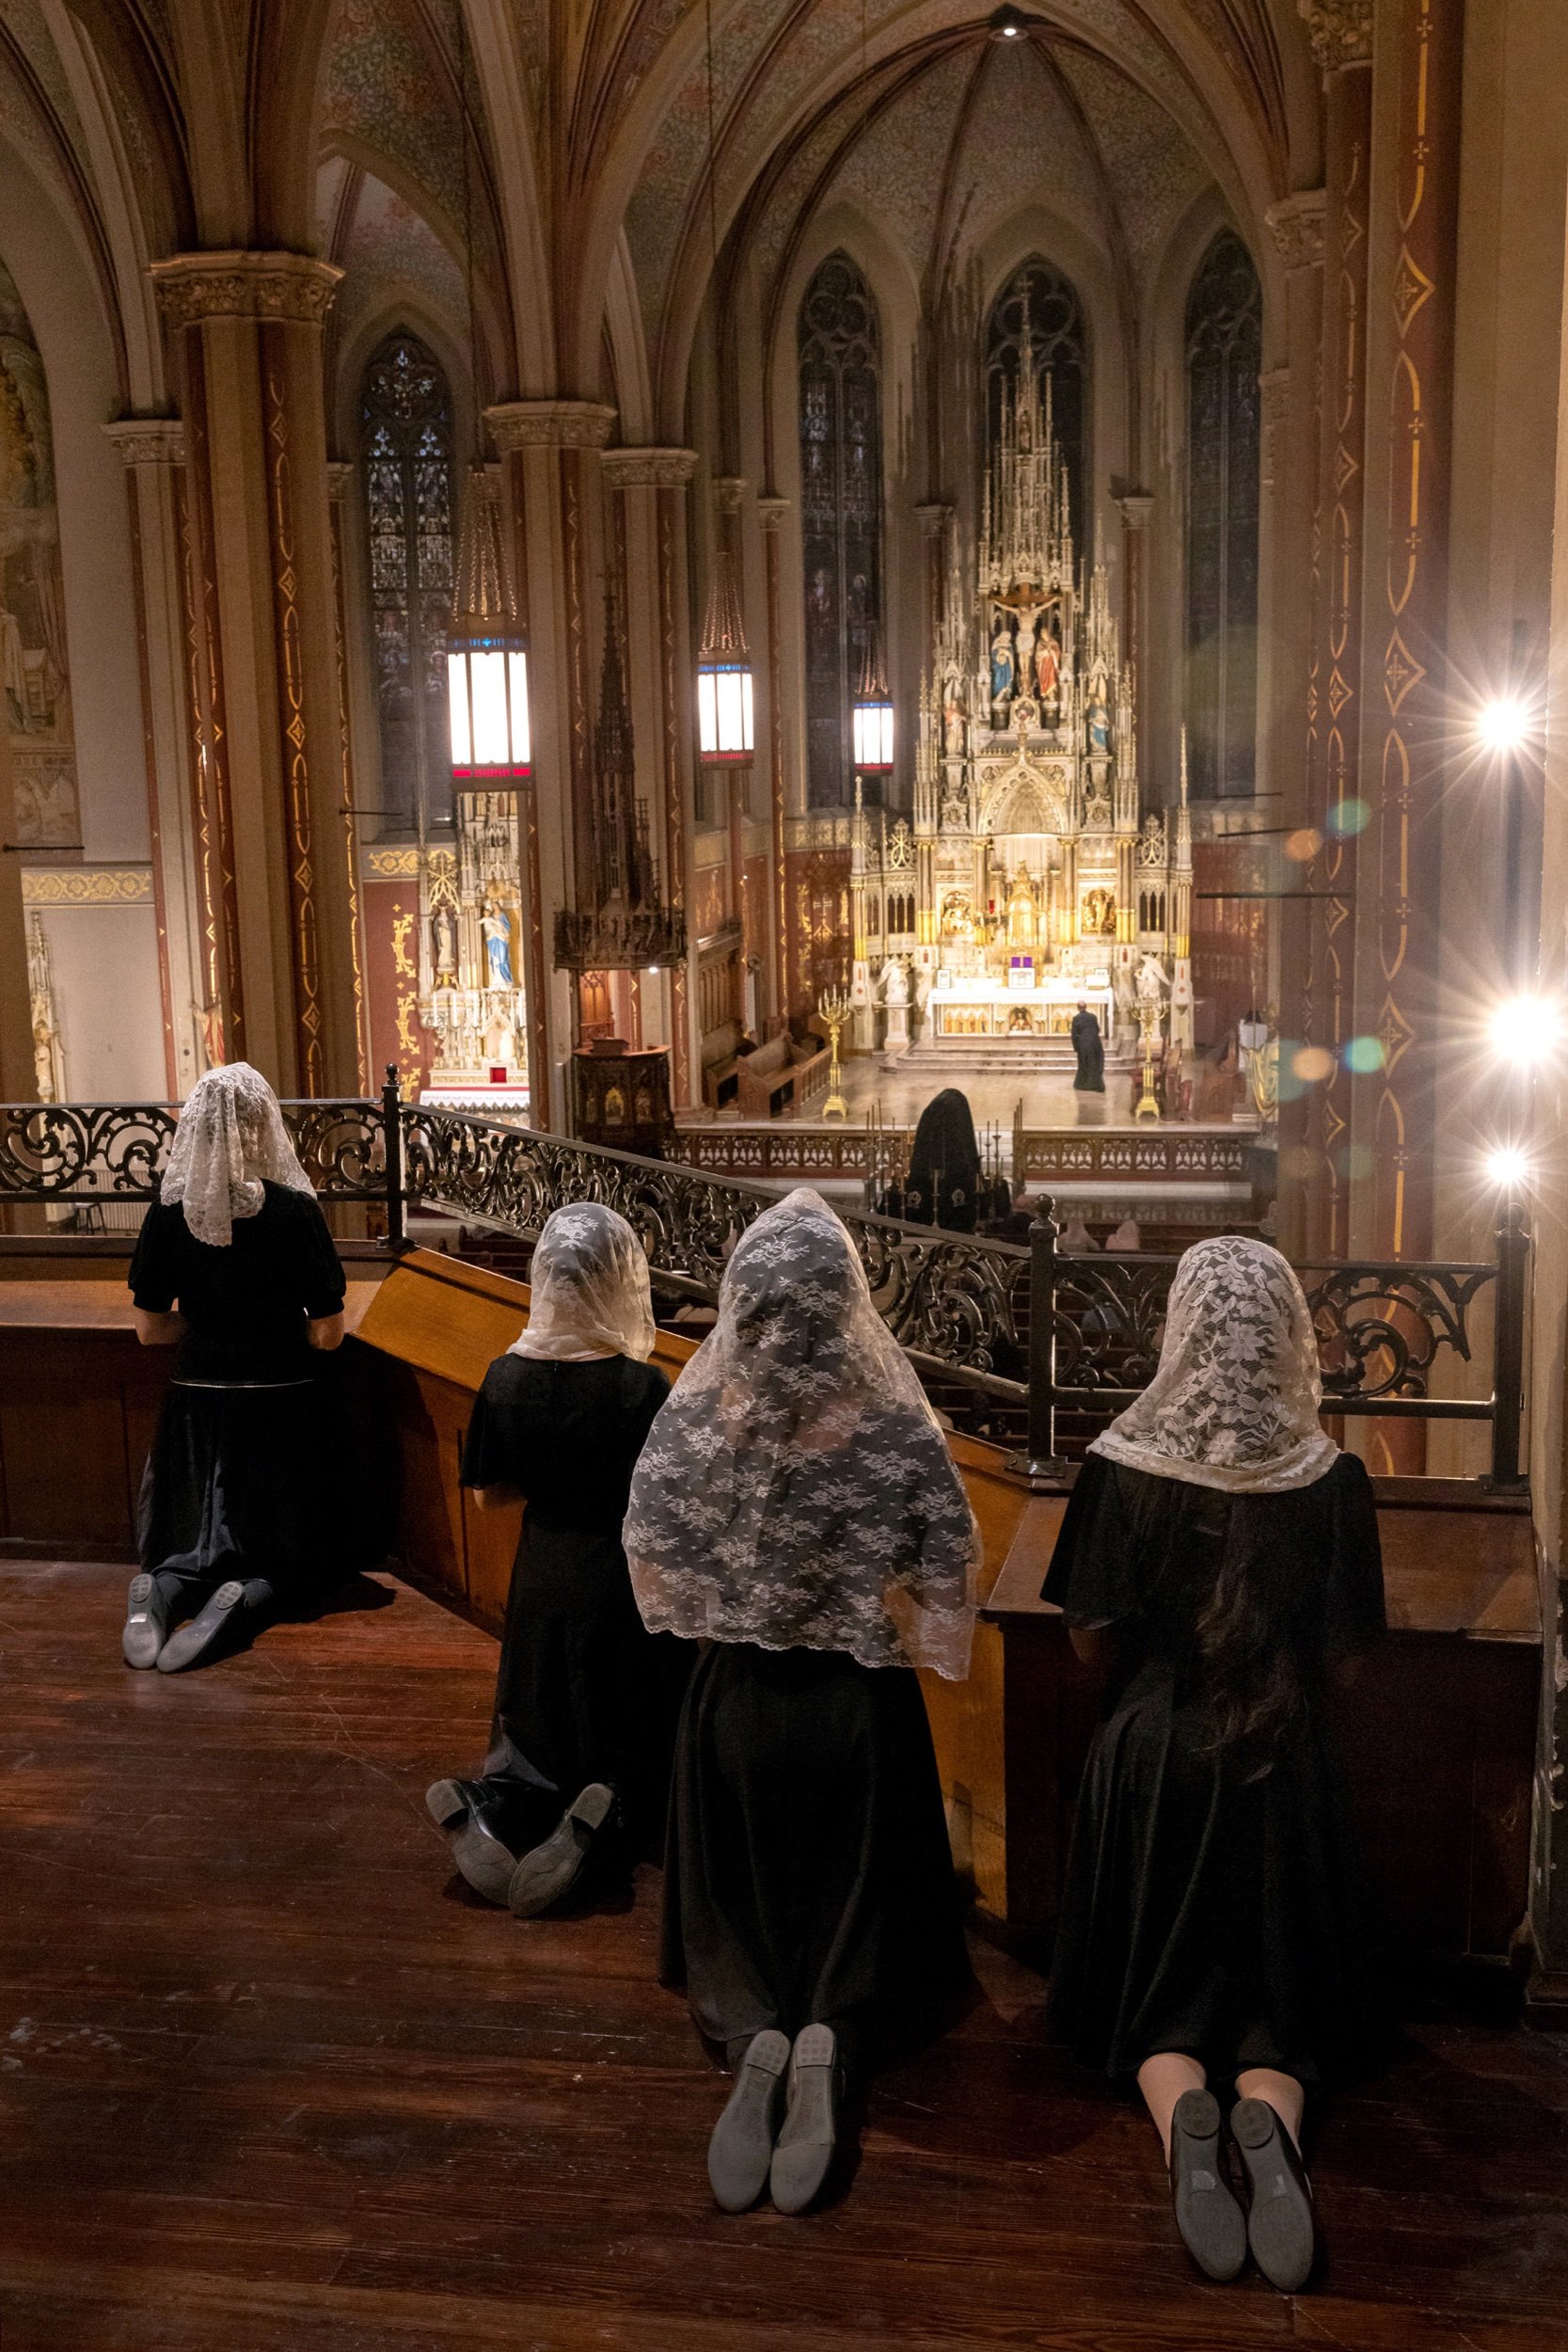  Women knelt before the start of a Mass featuring Wolfgang Amadeus Mozart’s Requiem during the Christ the King Music Festival on Nov. 2 at St. Francis de Sales Oratory in St. Louis, Missouri. 